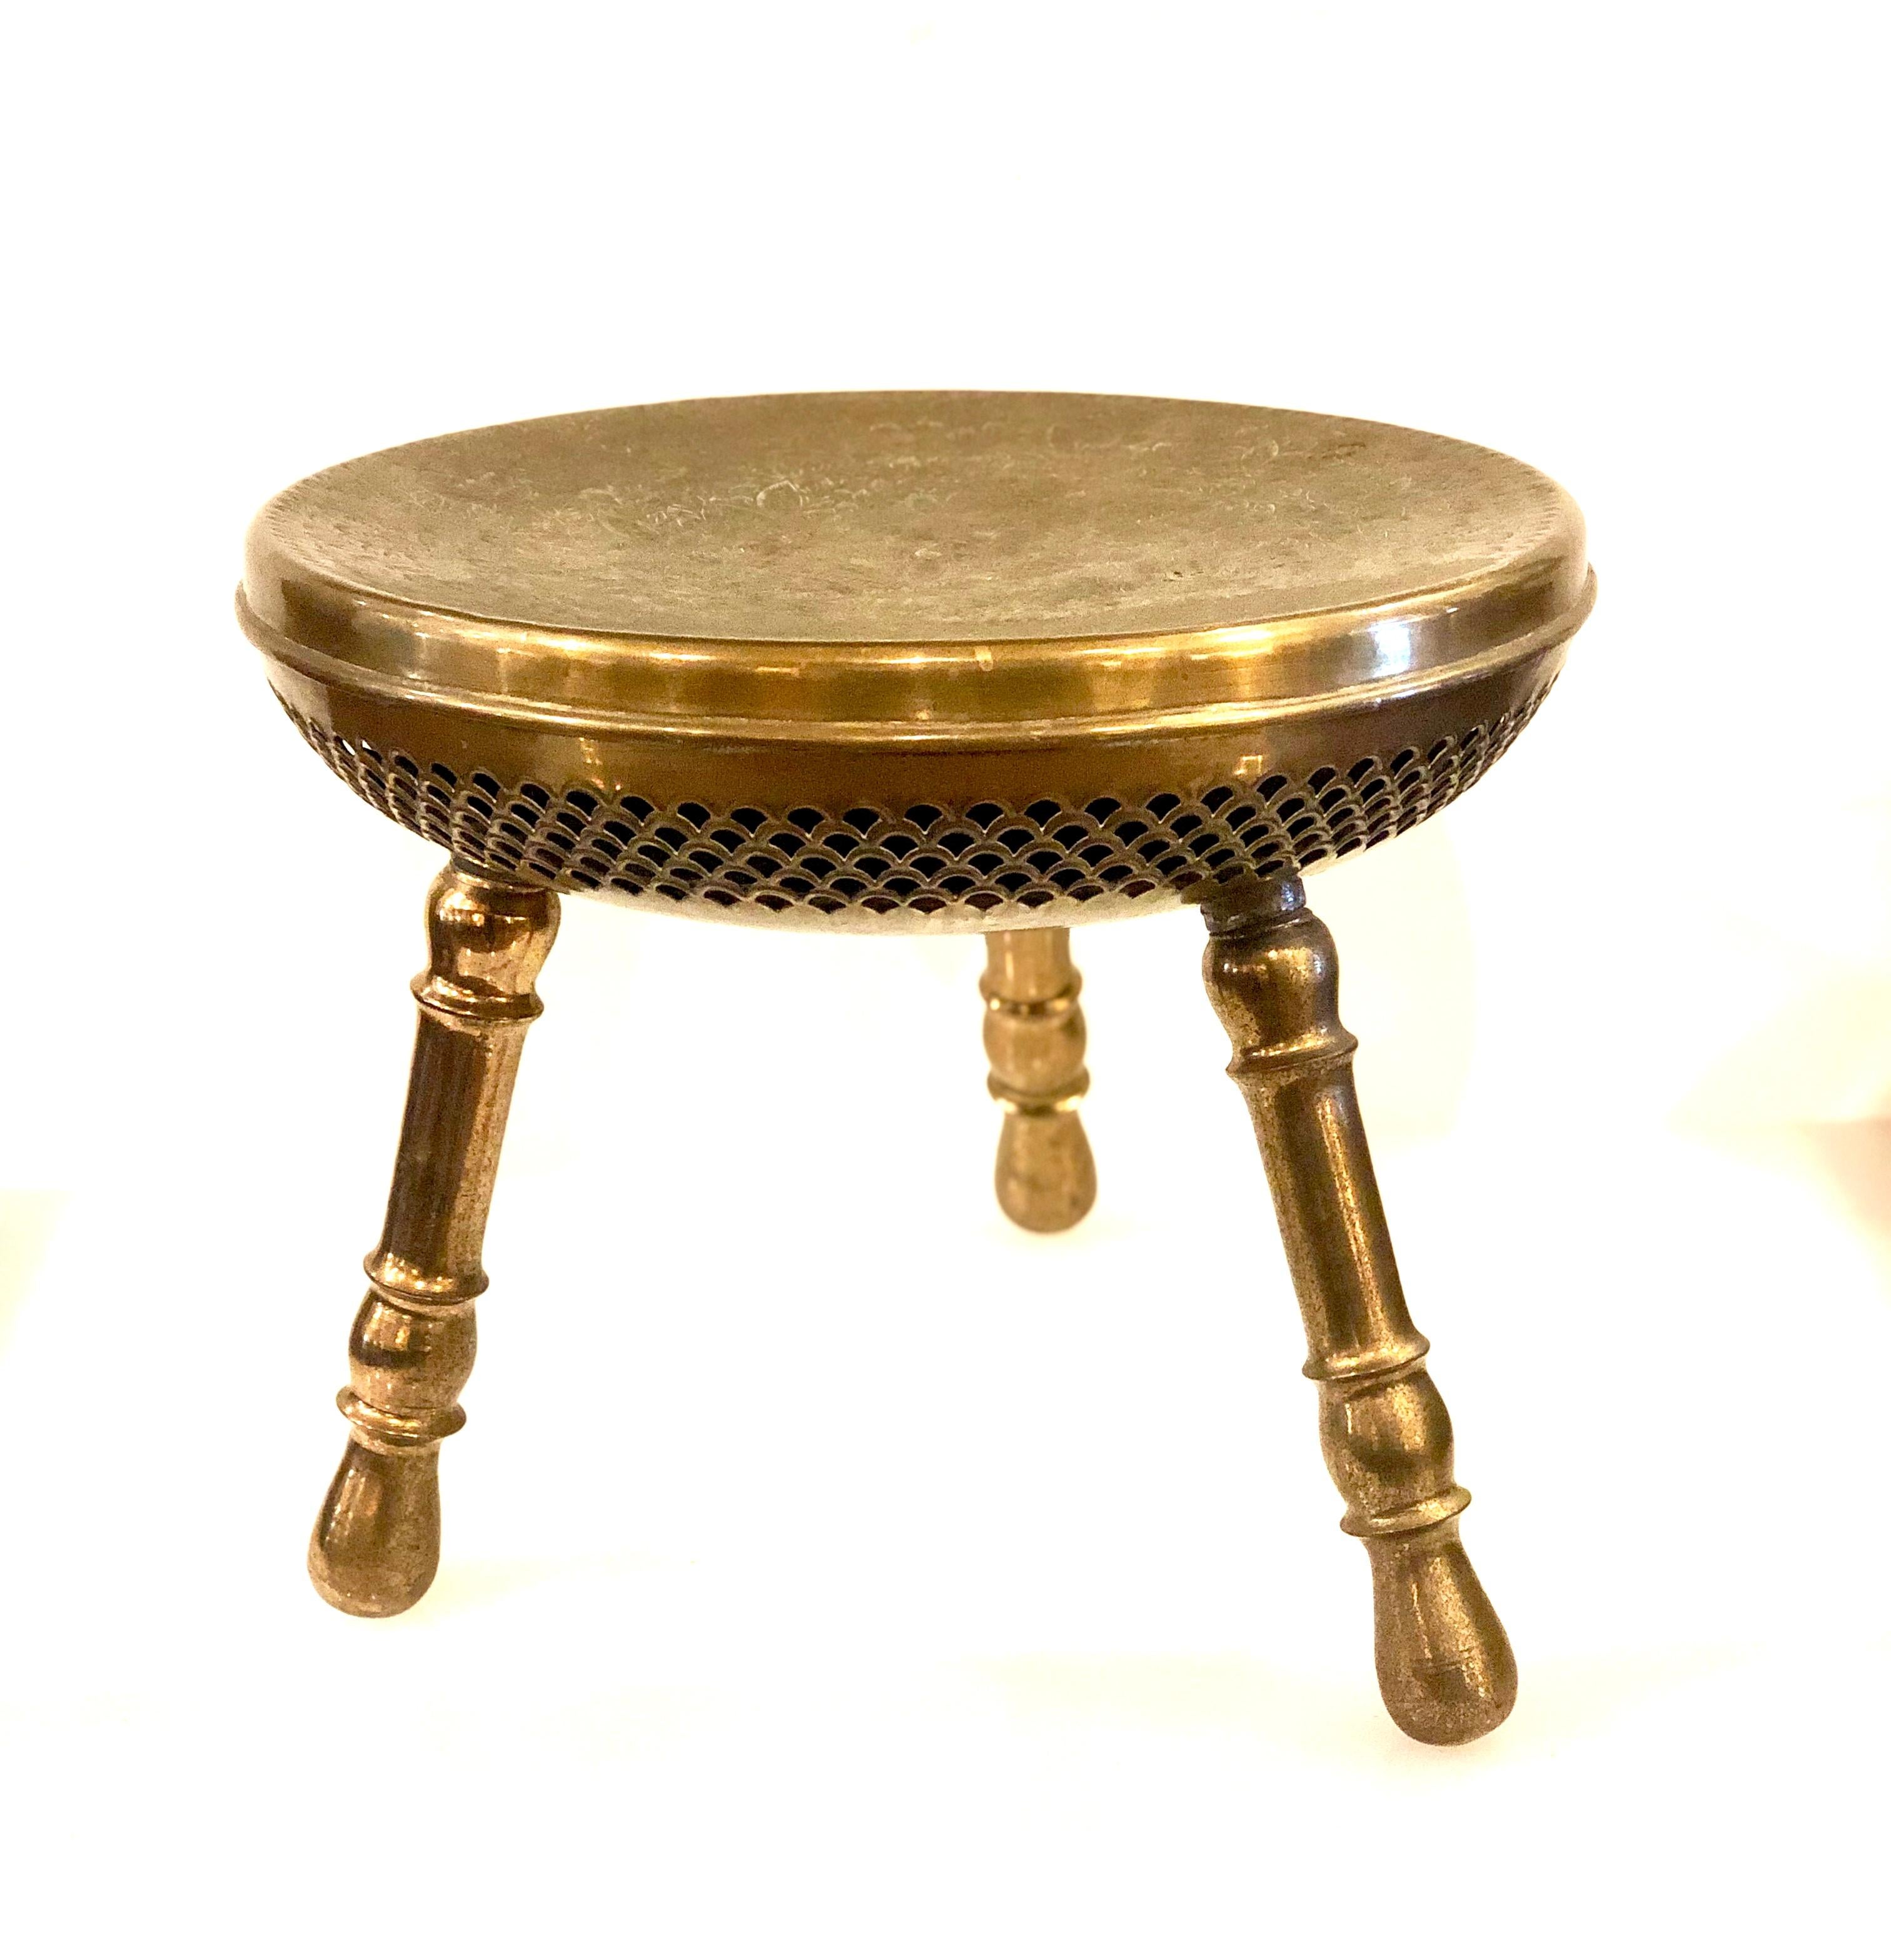 Antique brass tri legged foot warmer Indian low stool, with nice patina finish one leg unscrew for the fuel to ignite and use like a foot warmer, interesting decorative and functional.